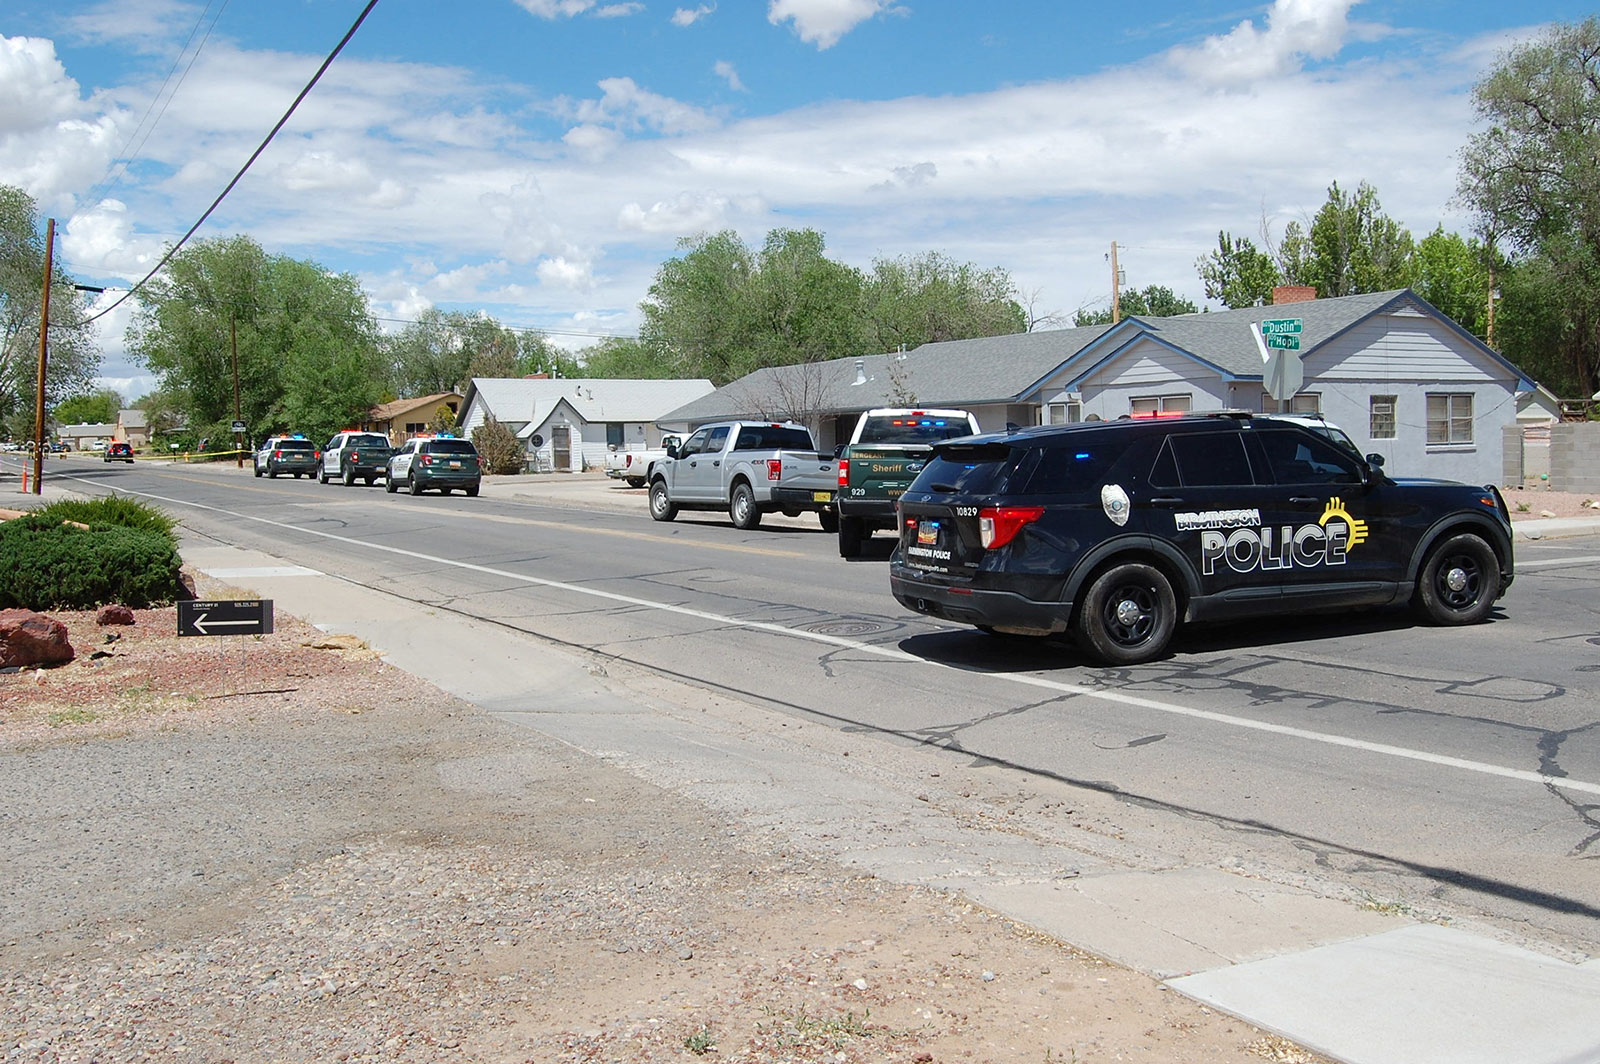 Law enforcement officers from the Farmington Police Department, San Juan County Sheriff's Office and New Mexico State Police deploy at the scene of a fatal shooting in Farmington, New Mexico, on May 15.